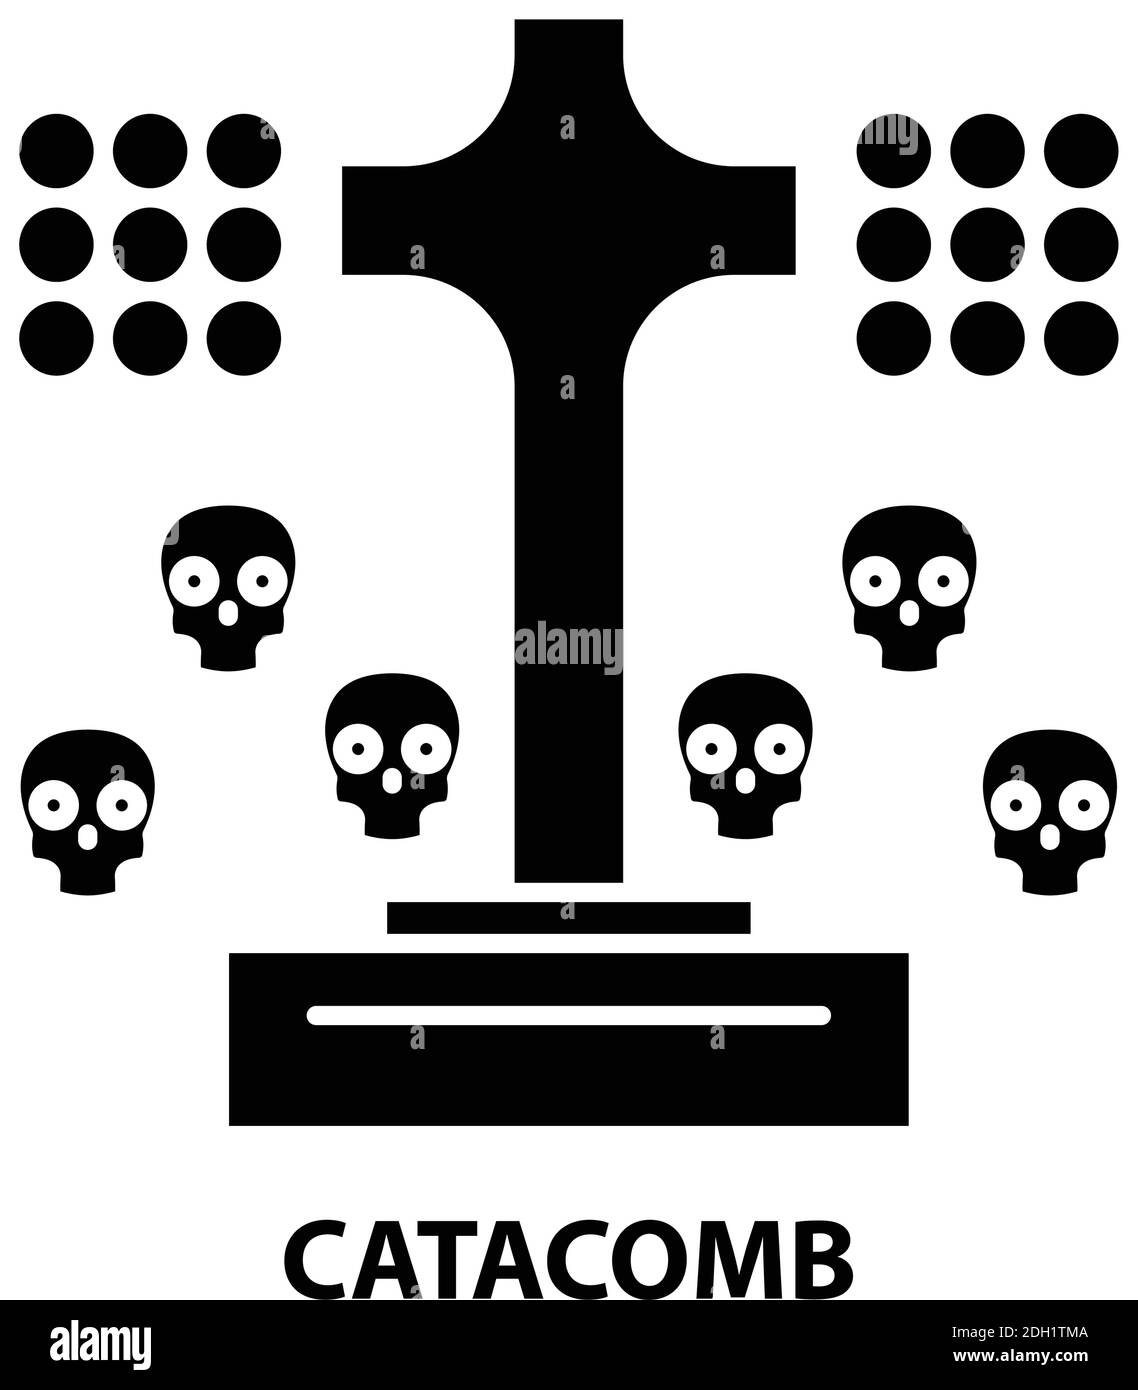 catacomb icon, black vector sign with editable strokes, concept illustration Stock Vector